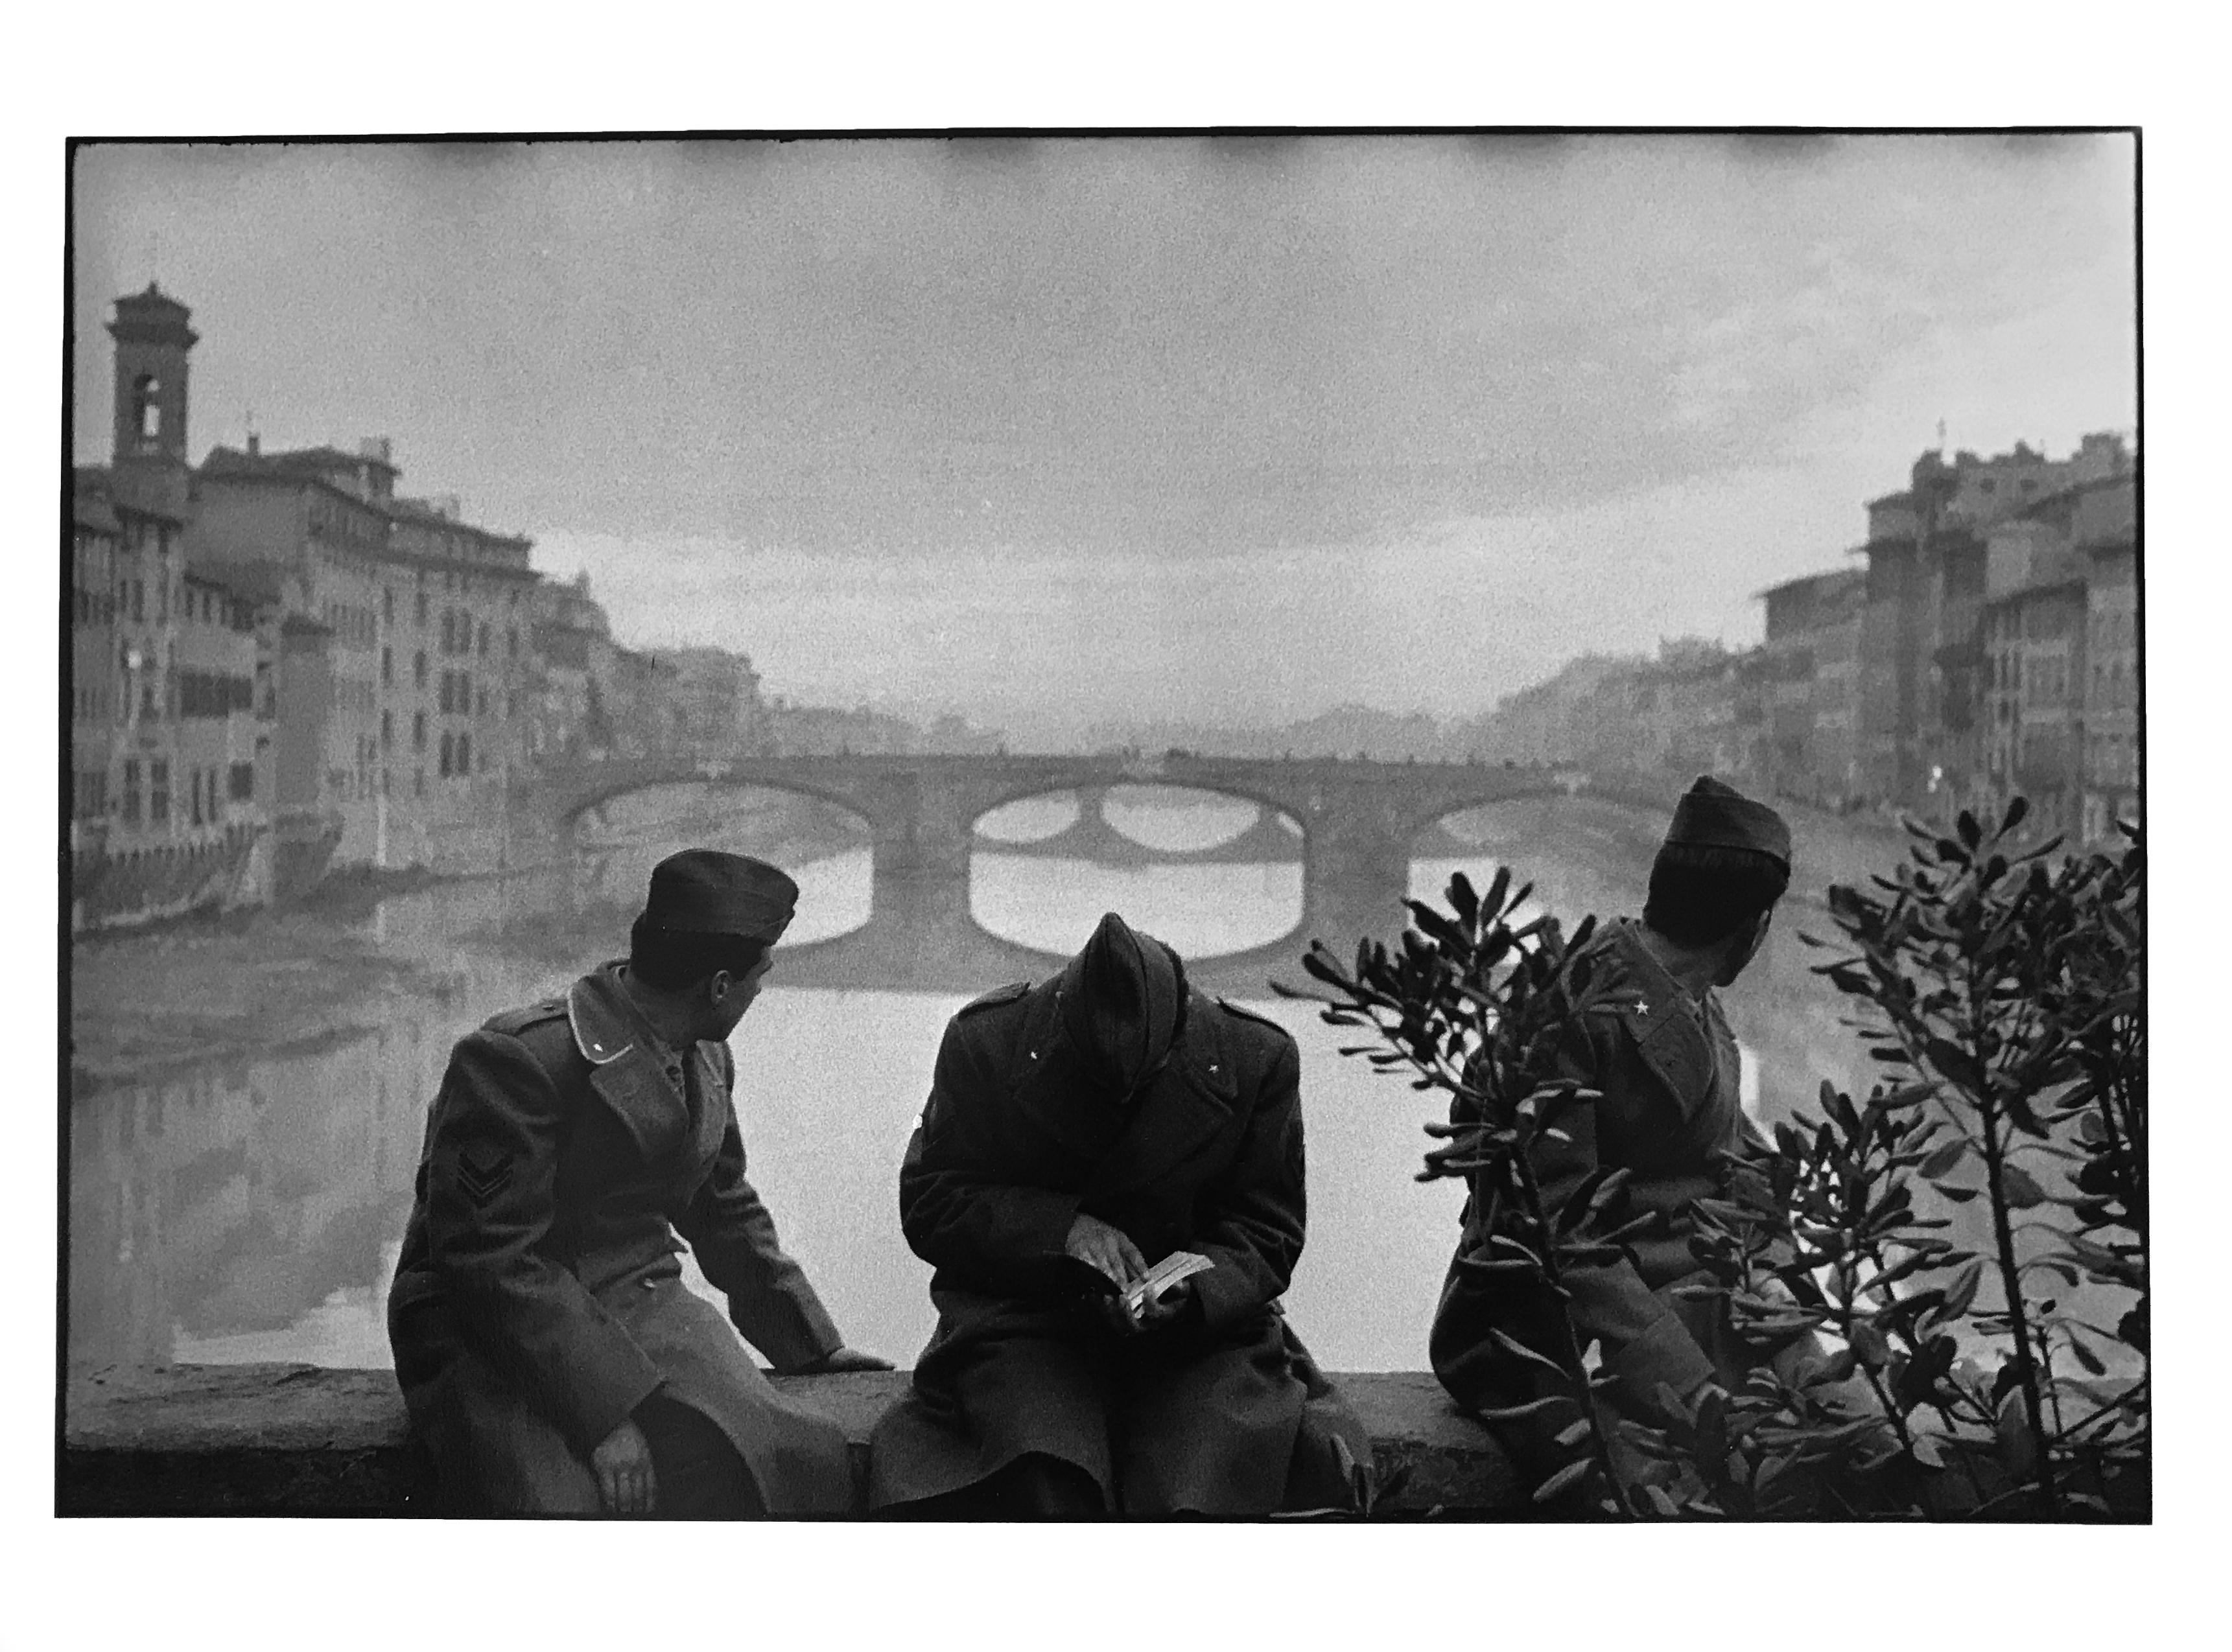 Leonard Freed Black and White Photograph - Arno River, Florence, Italy, Street Photography of Soldiers